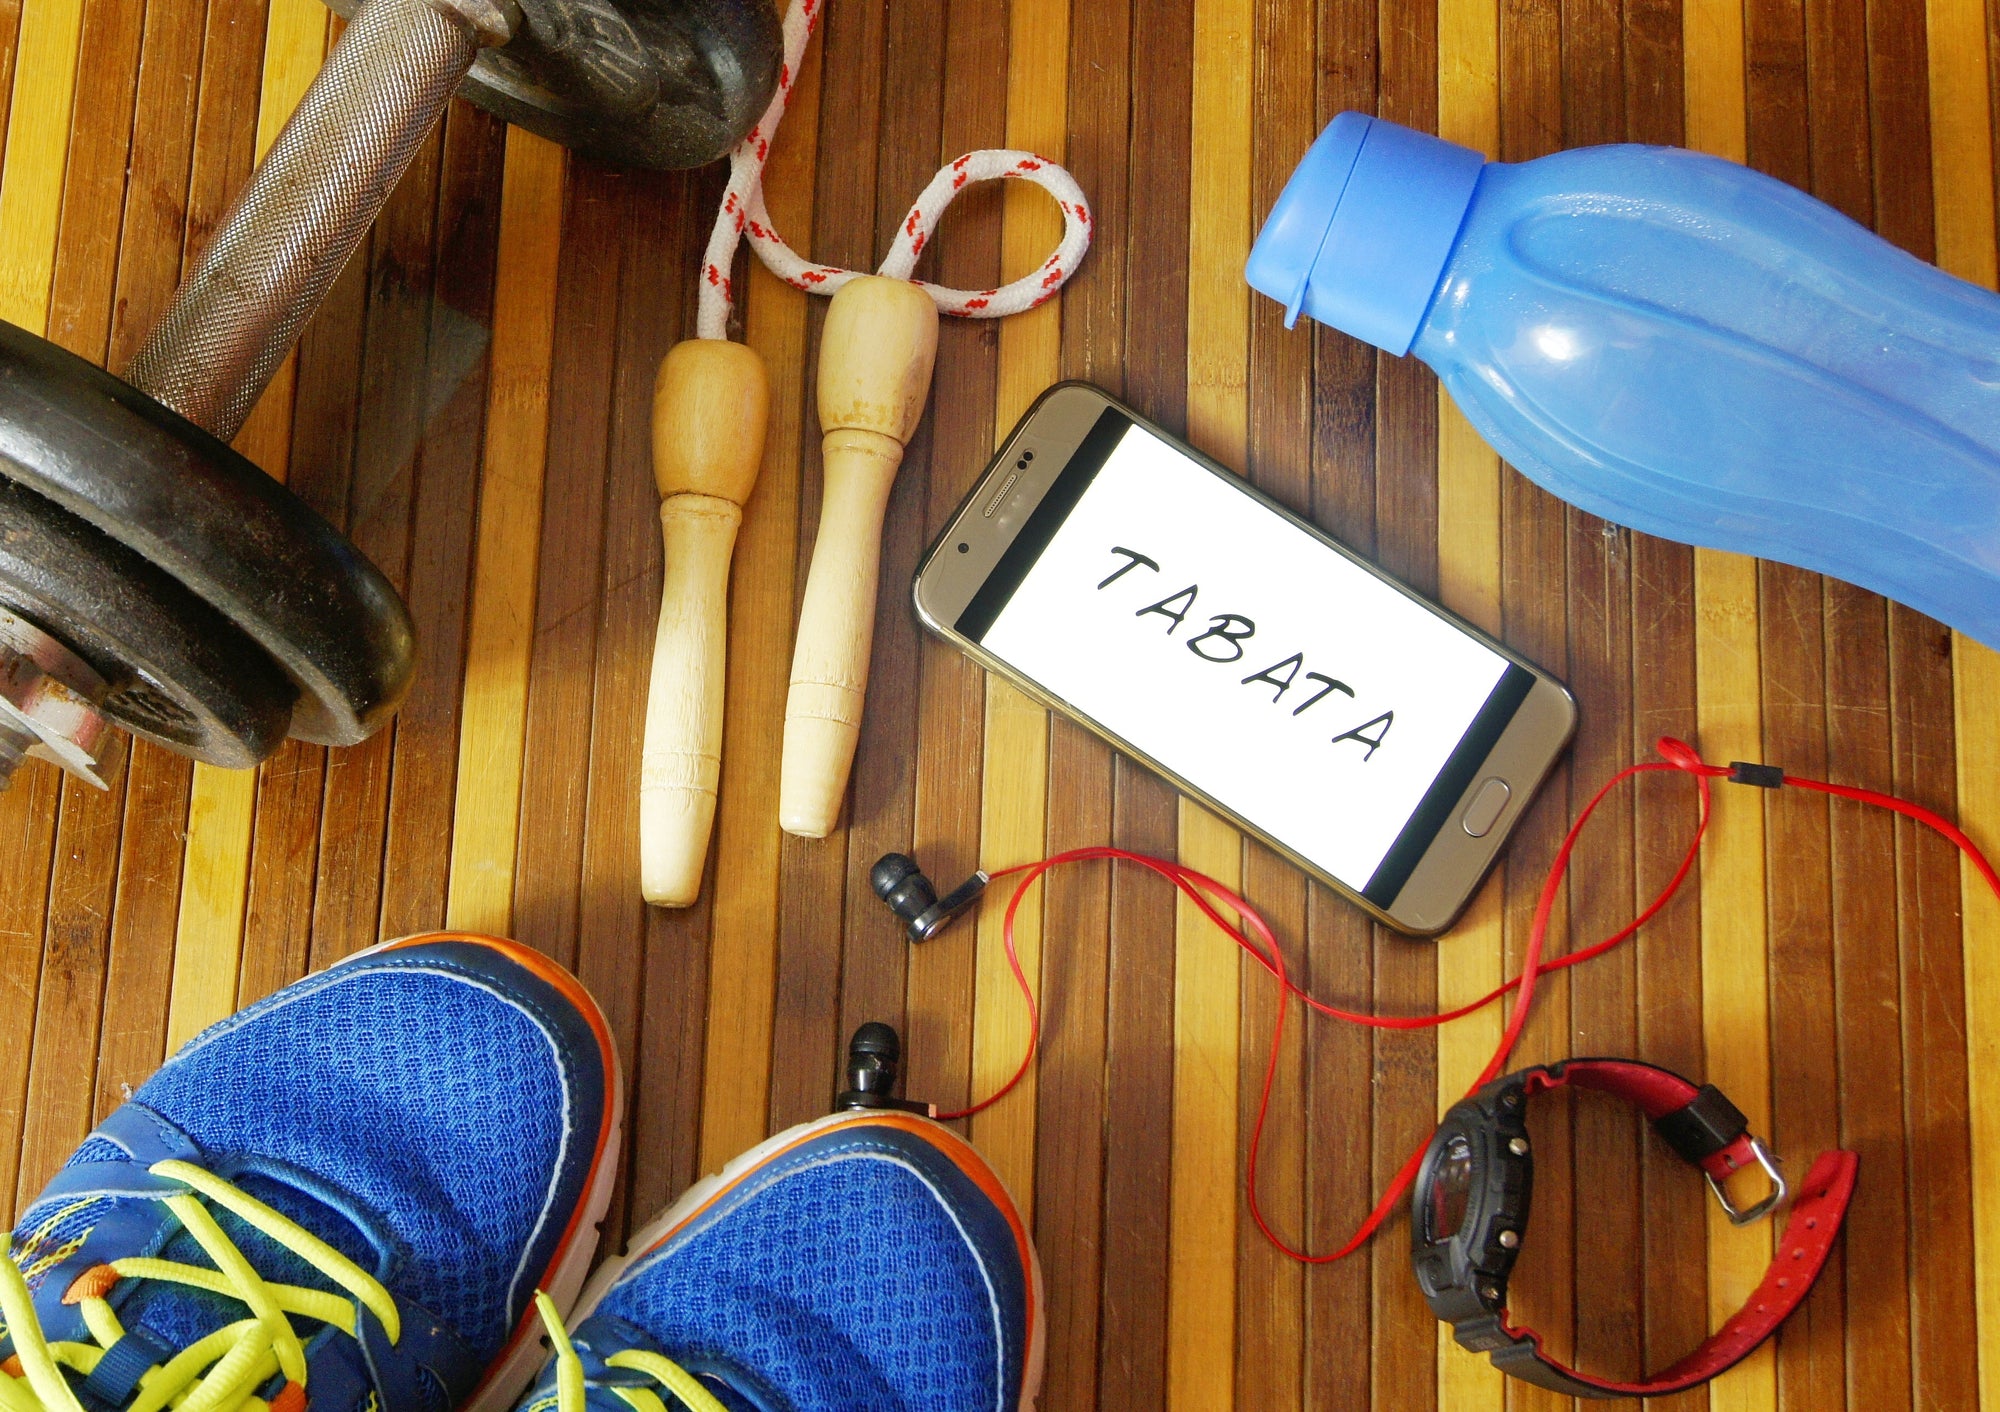 Dumbbells, sport shoes, smart phone with earphone, skipping rope and water bottle on wooden gym floor with word tabata